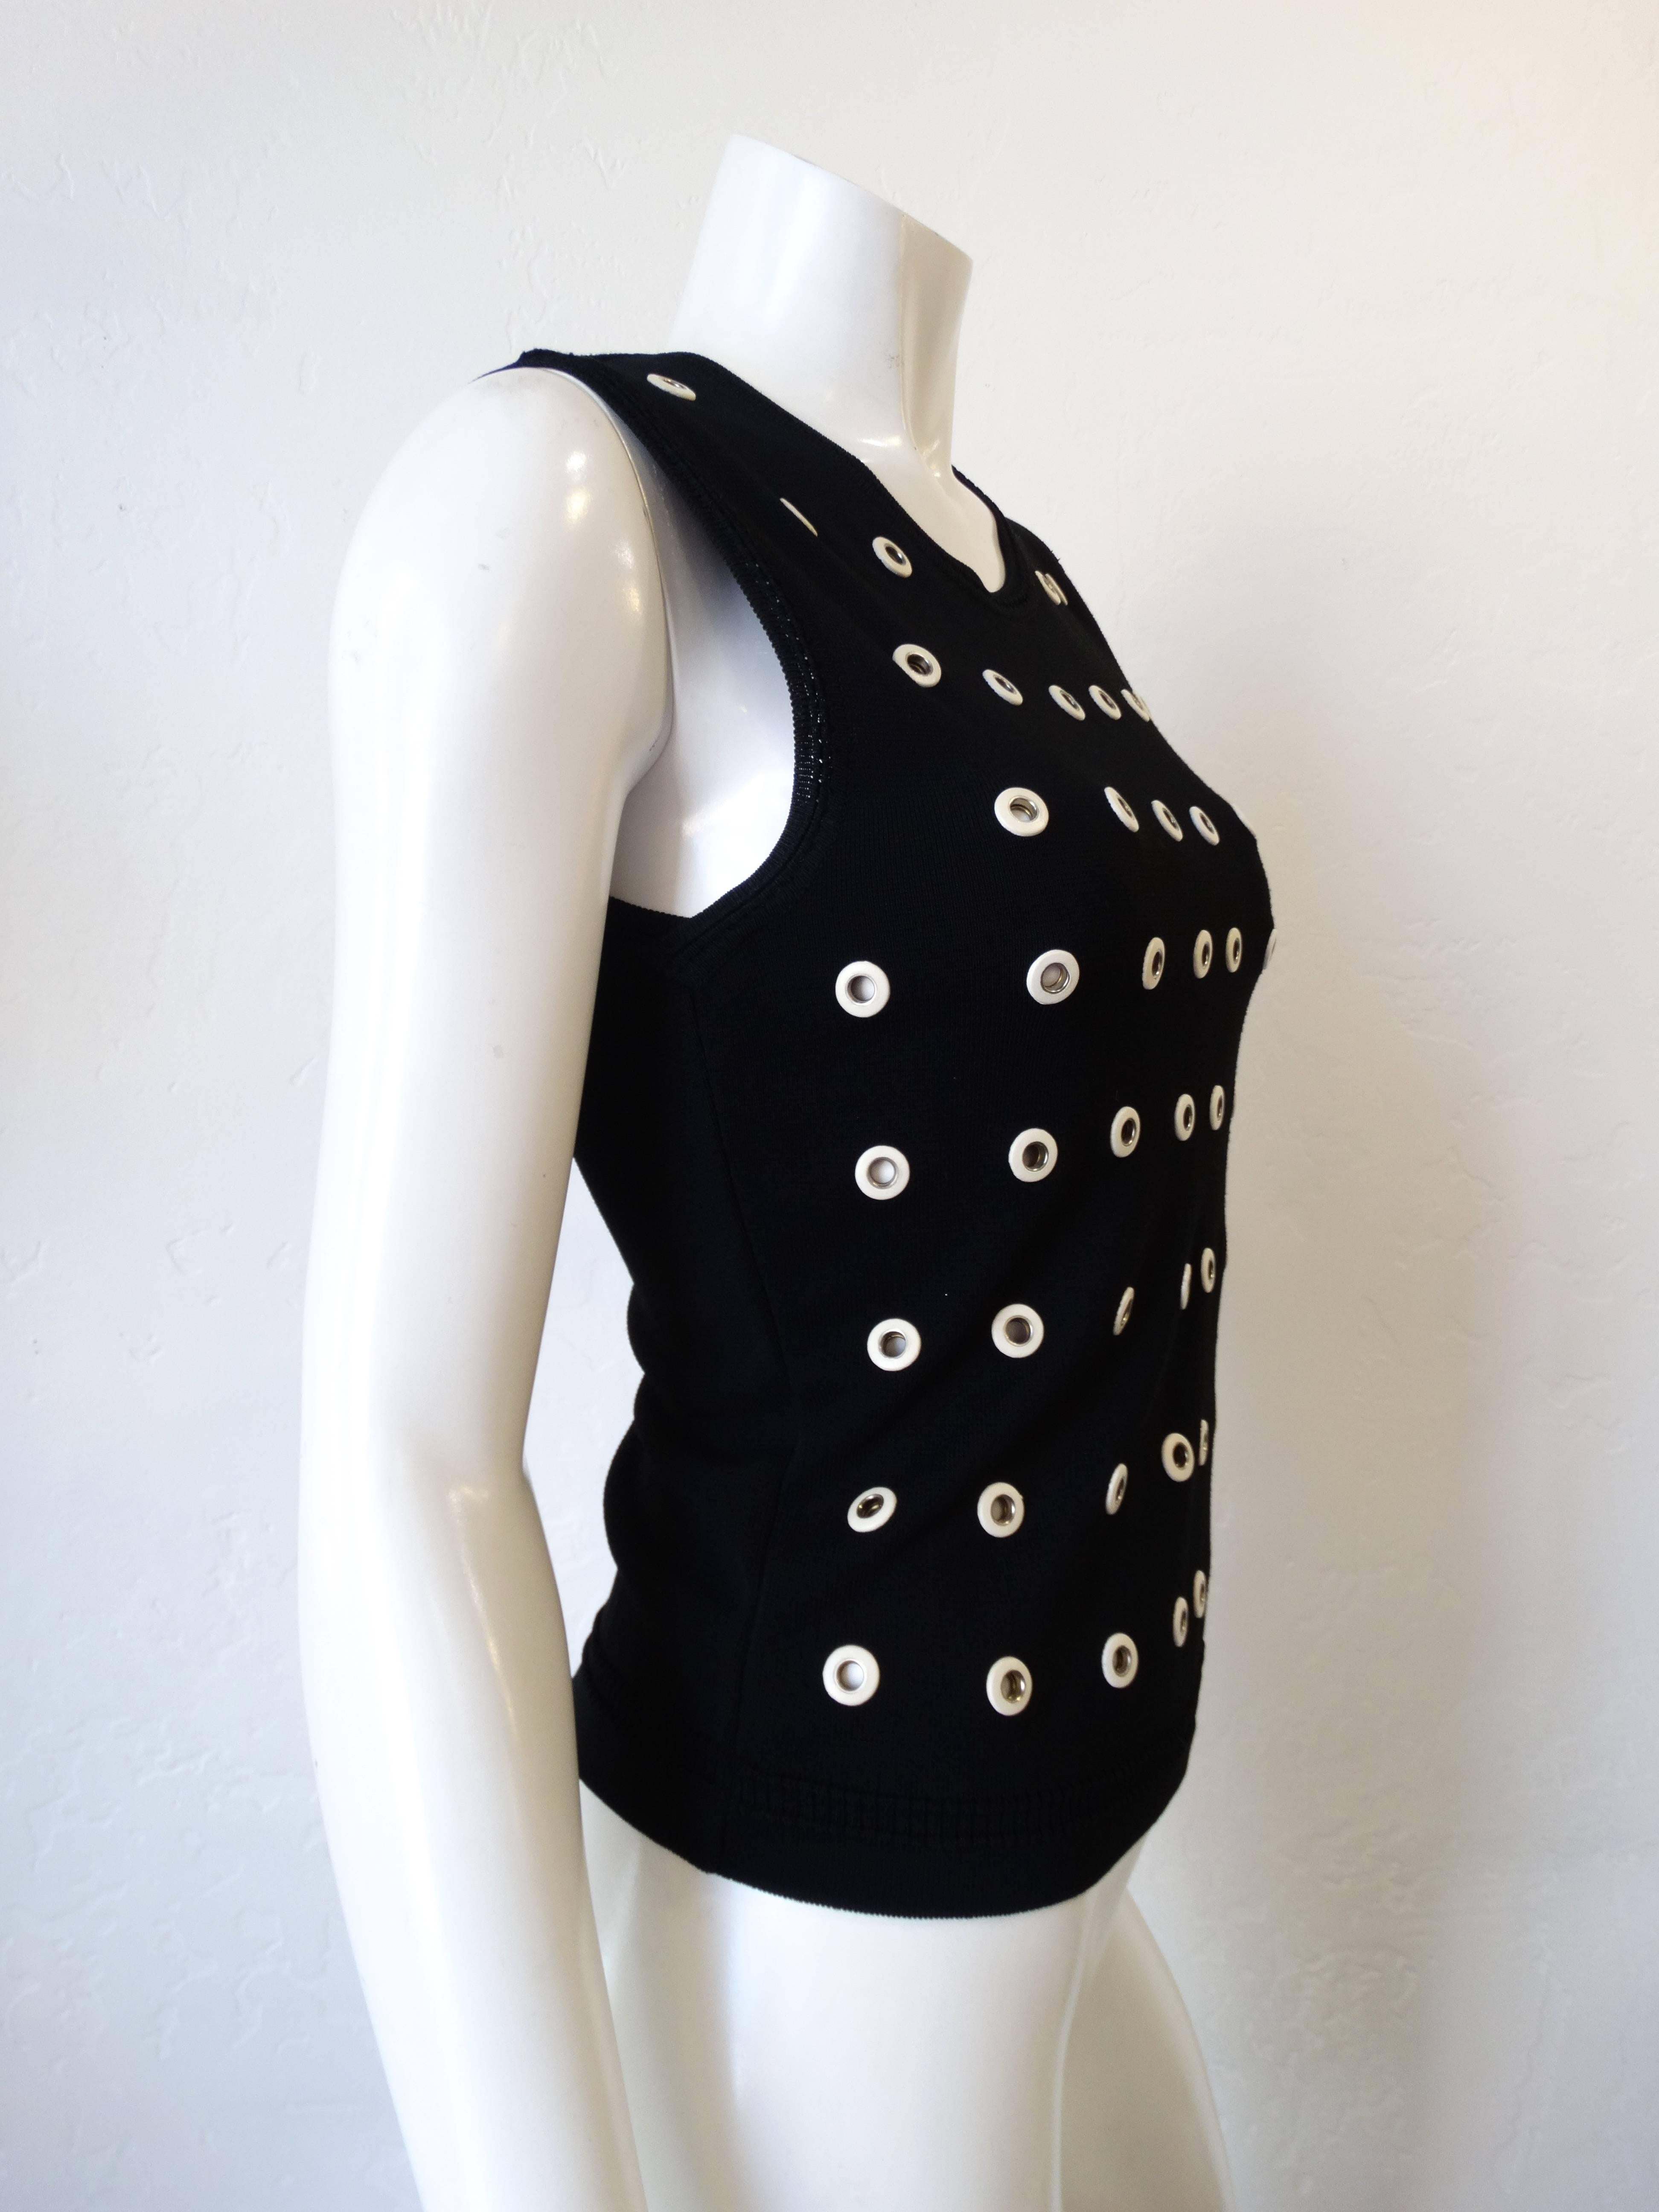 Eyelet tank from Gianfranco Ferre! This mod little tank top makes for an incredible basic- tucked into skirts, jeans you name it! Black knit fabric accented with white leather eyelets all over! Marked a size 44, best fits a size small. 

Bust: